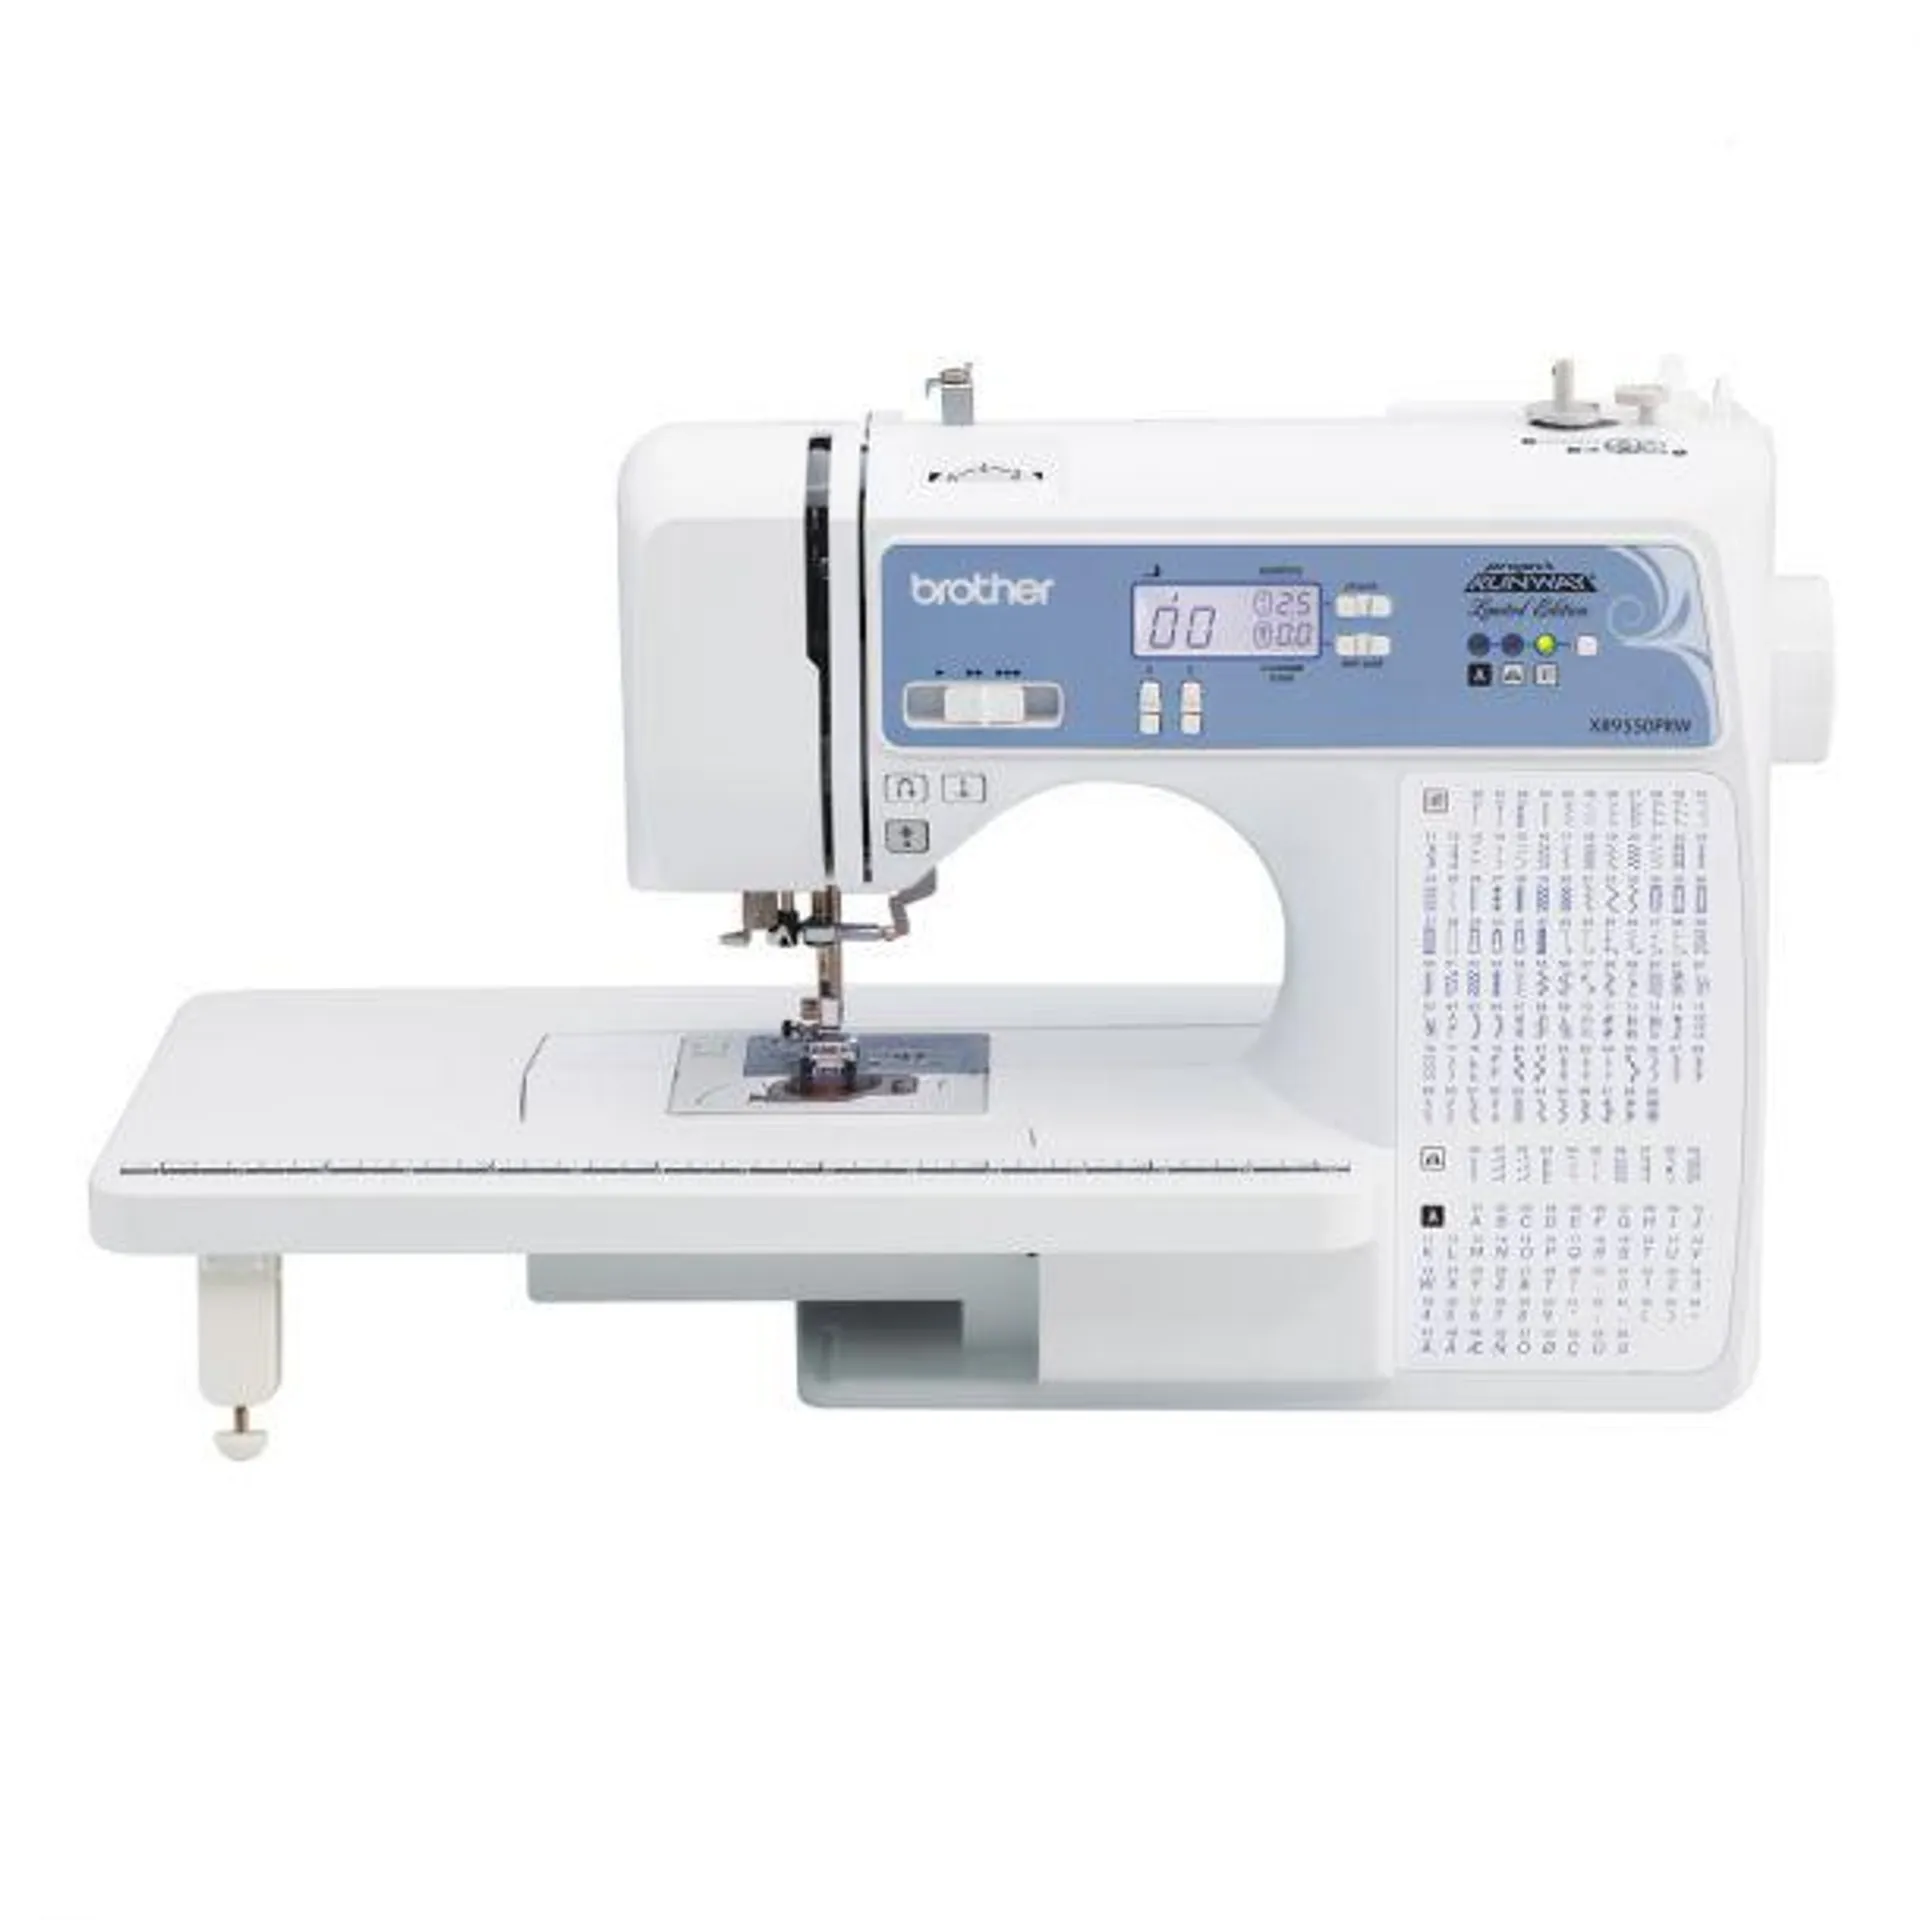 Brother XR9550 Sewing and Quilting Machine with Automatic Needle Threading - White